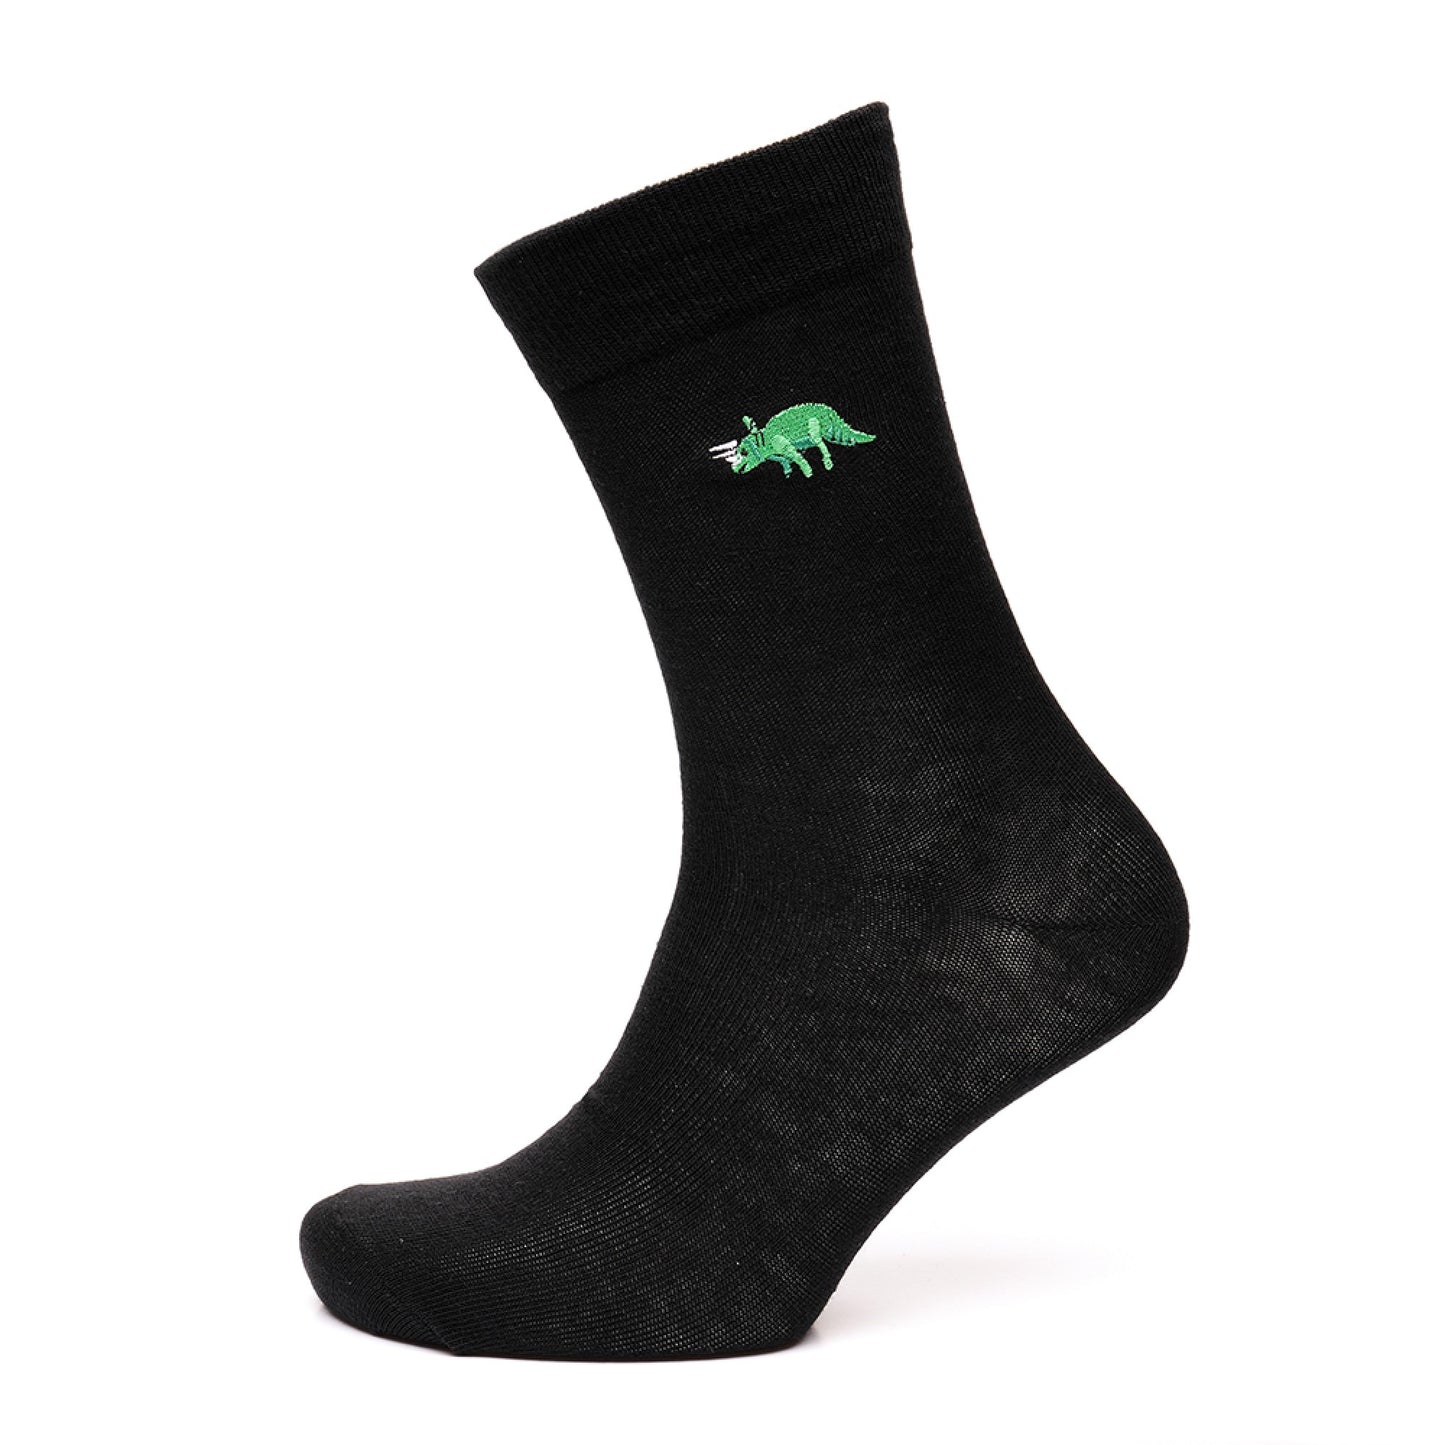 5 Prs Mens Black Cotton Rich Calf Length Socks with Embroidery - Dinosaur or Football